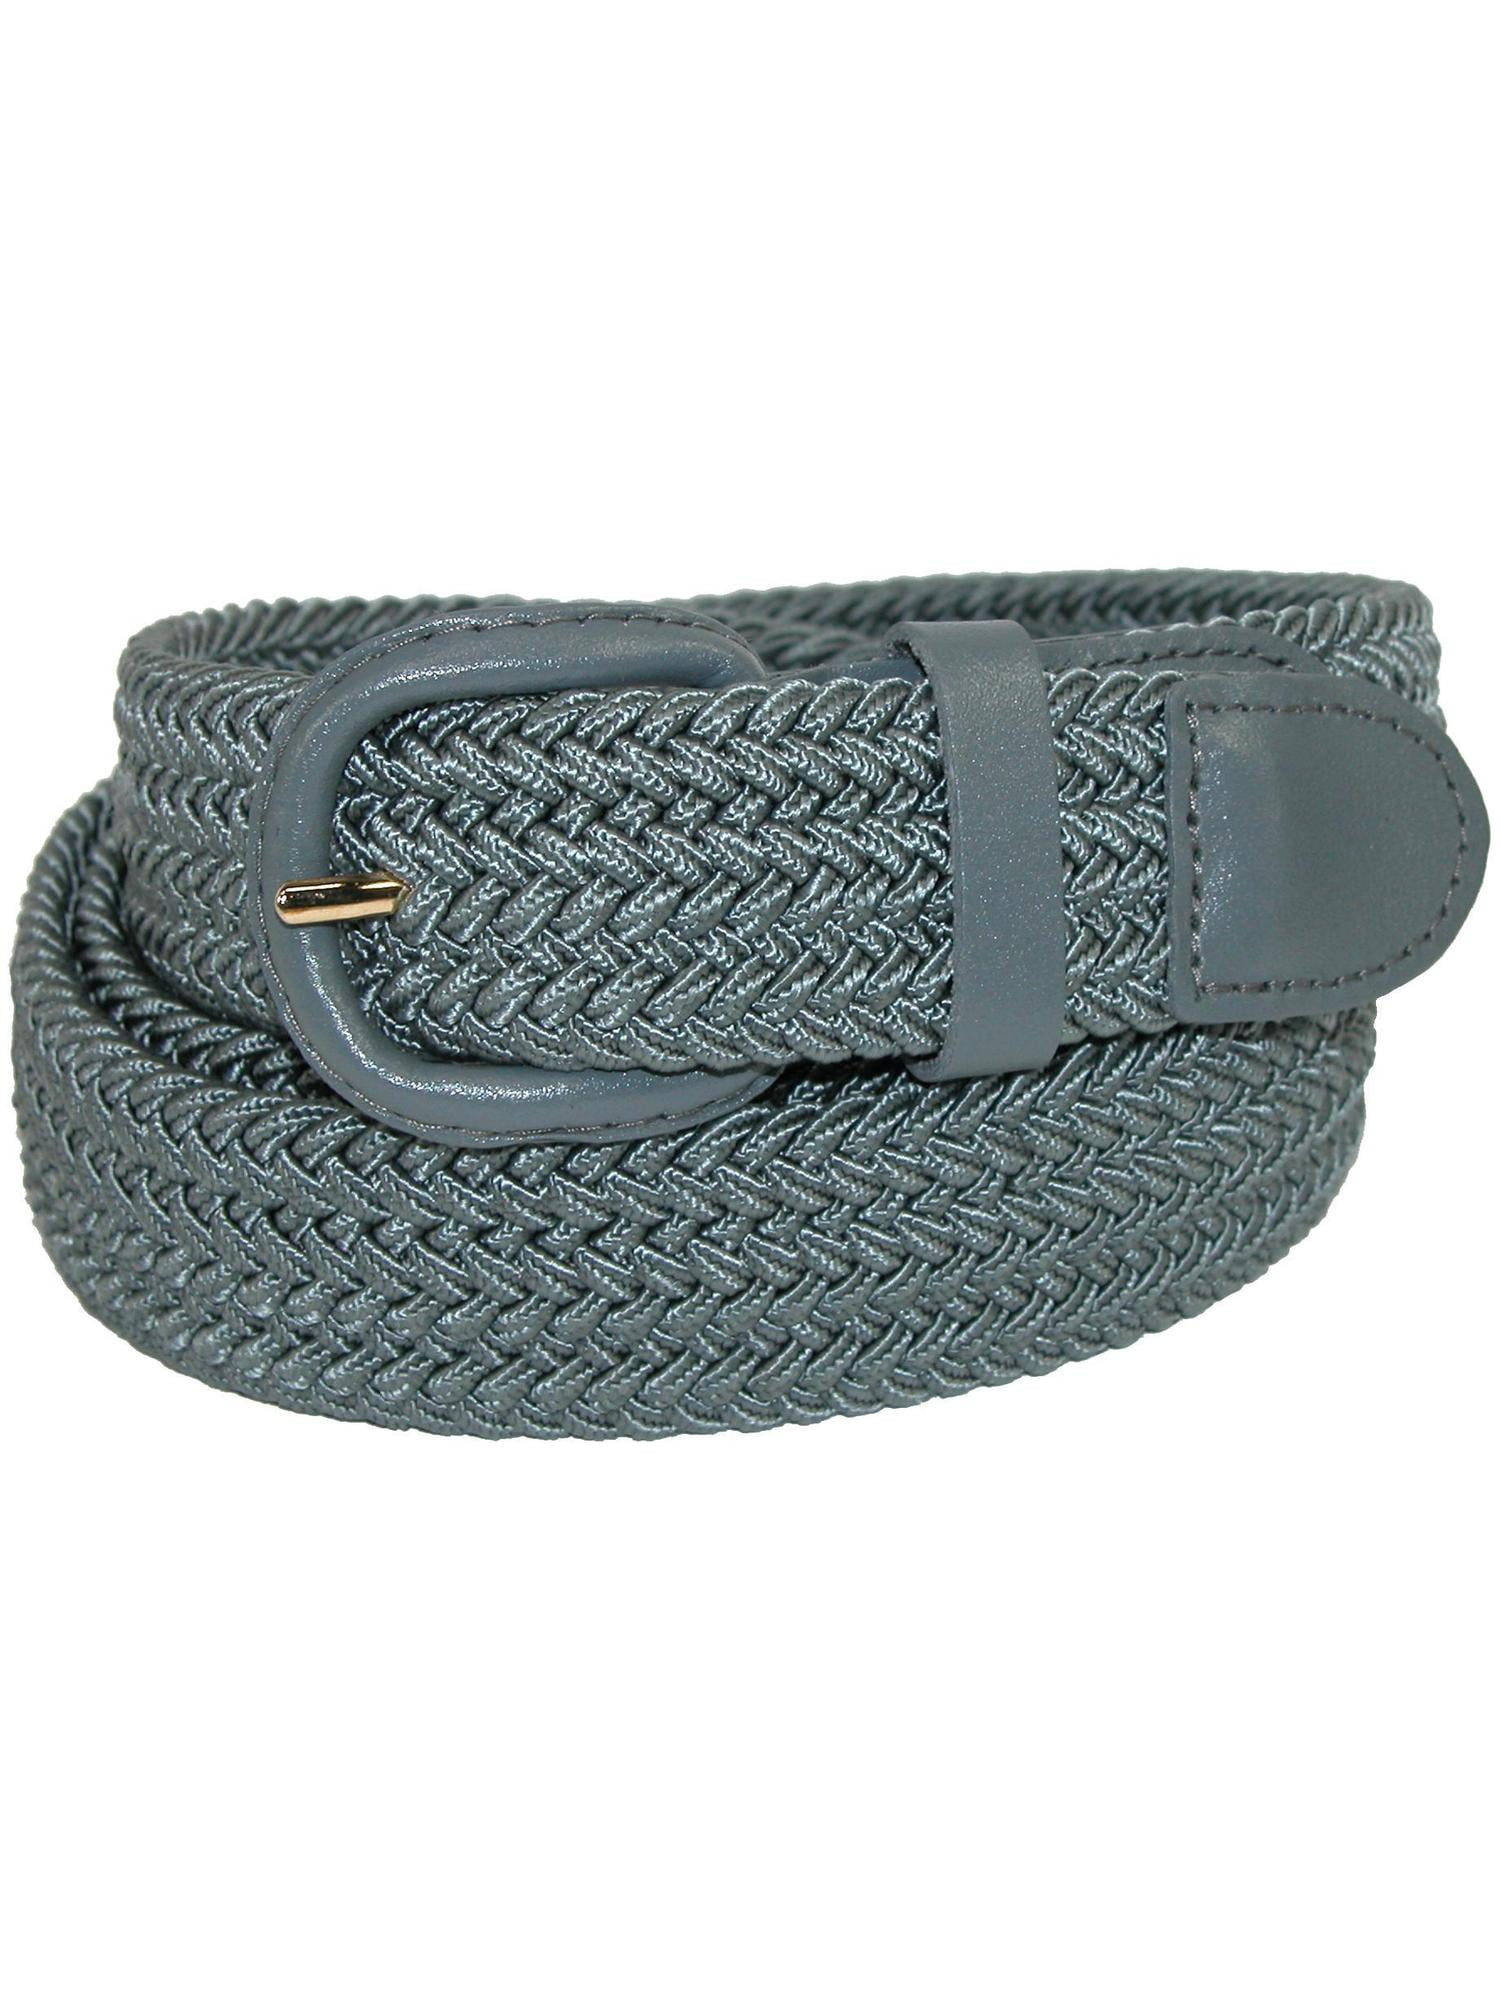 Size Small Mens Elastic Braided Belt with Covered Buckle (Pack of 2 ...